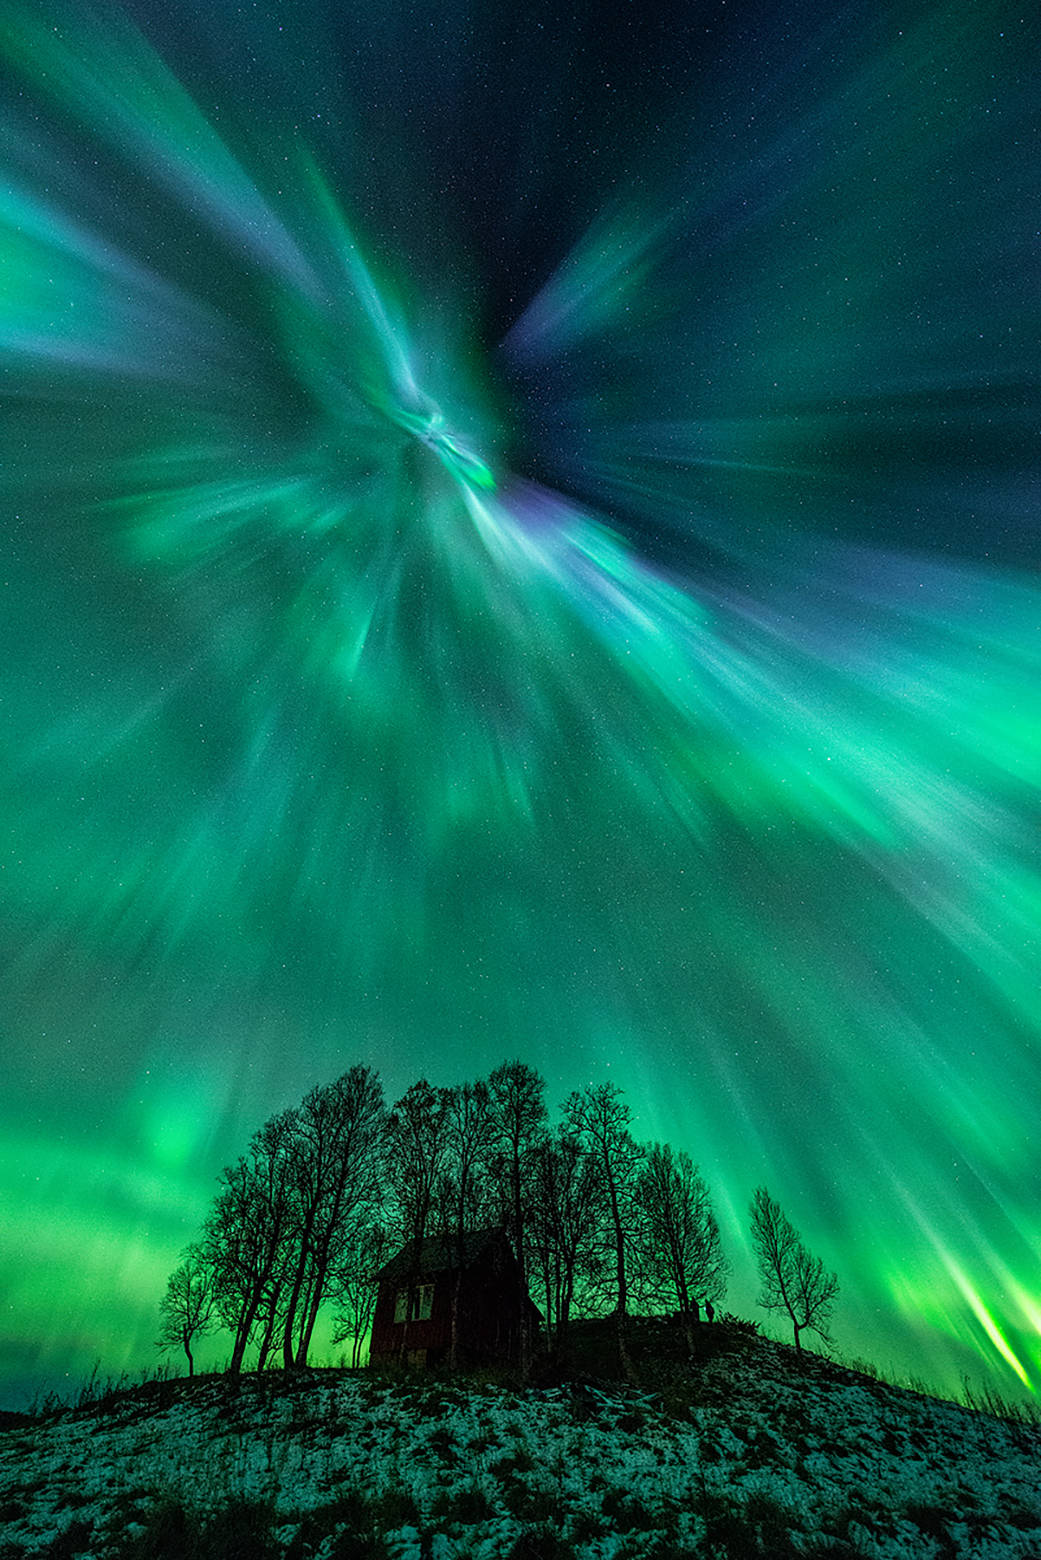 Northern lights from Norway on Oct. 8, 2015